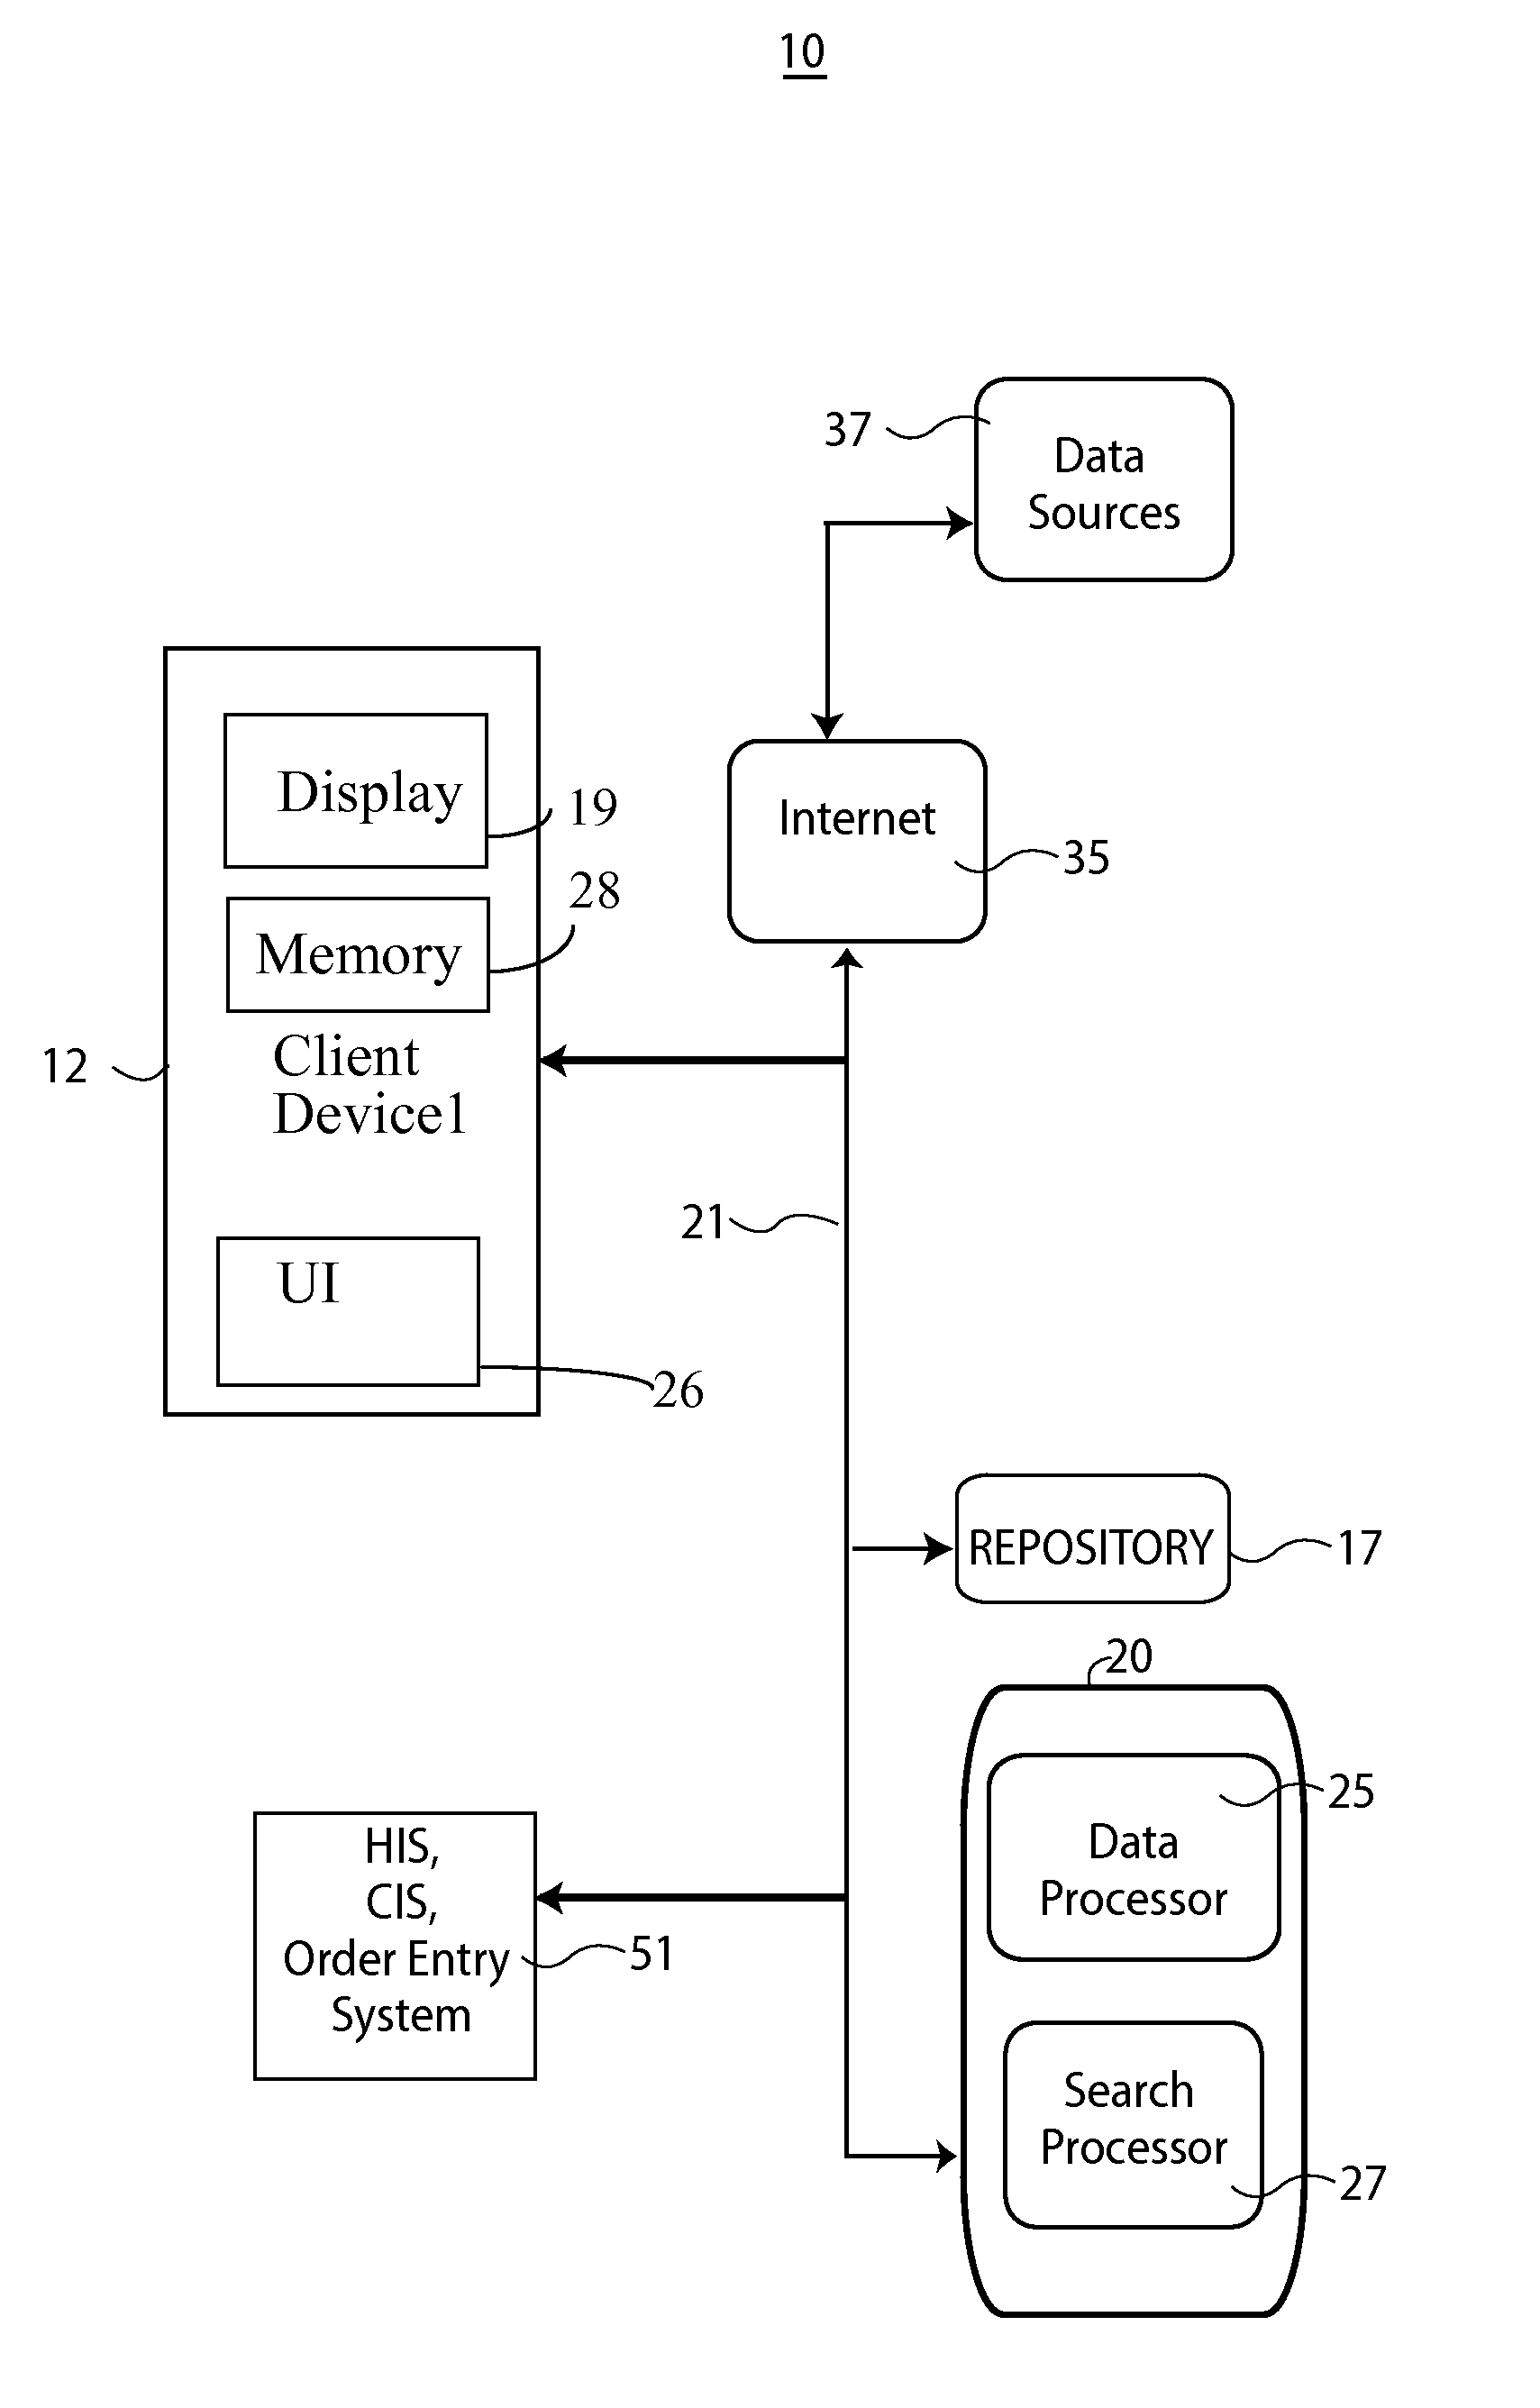 System for Generating a Medical Knowledge Base